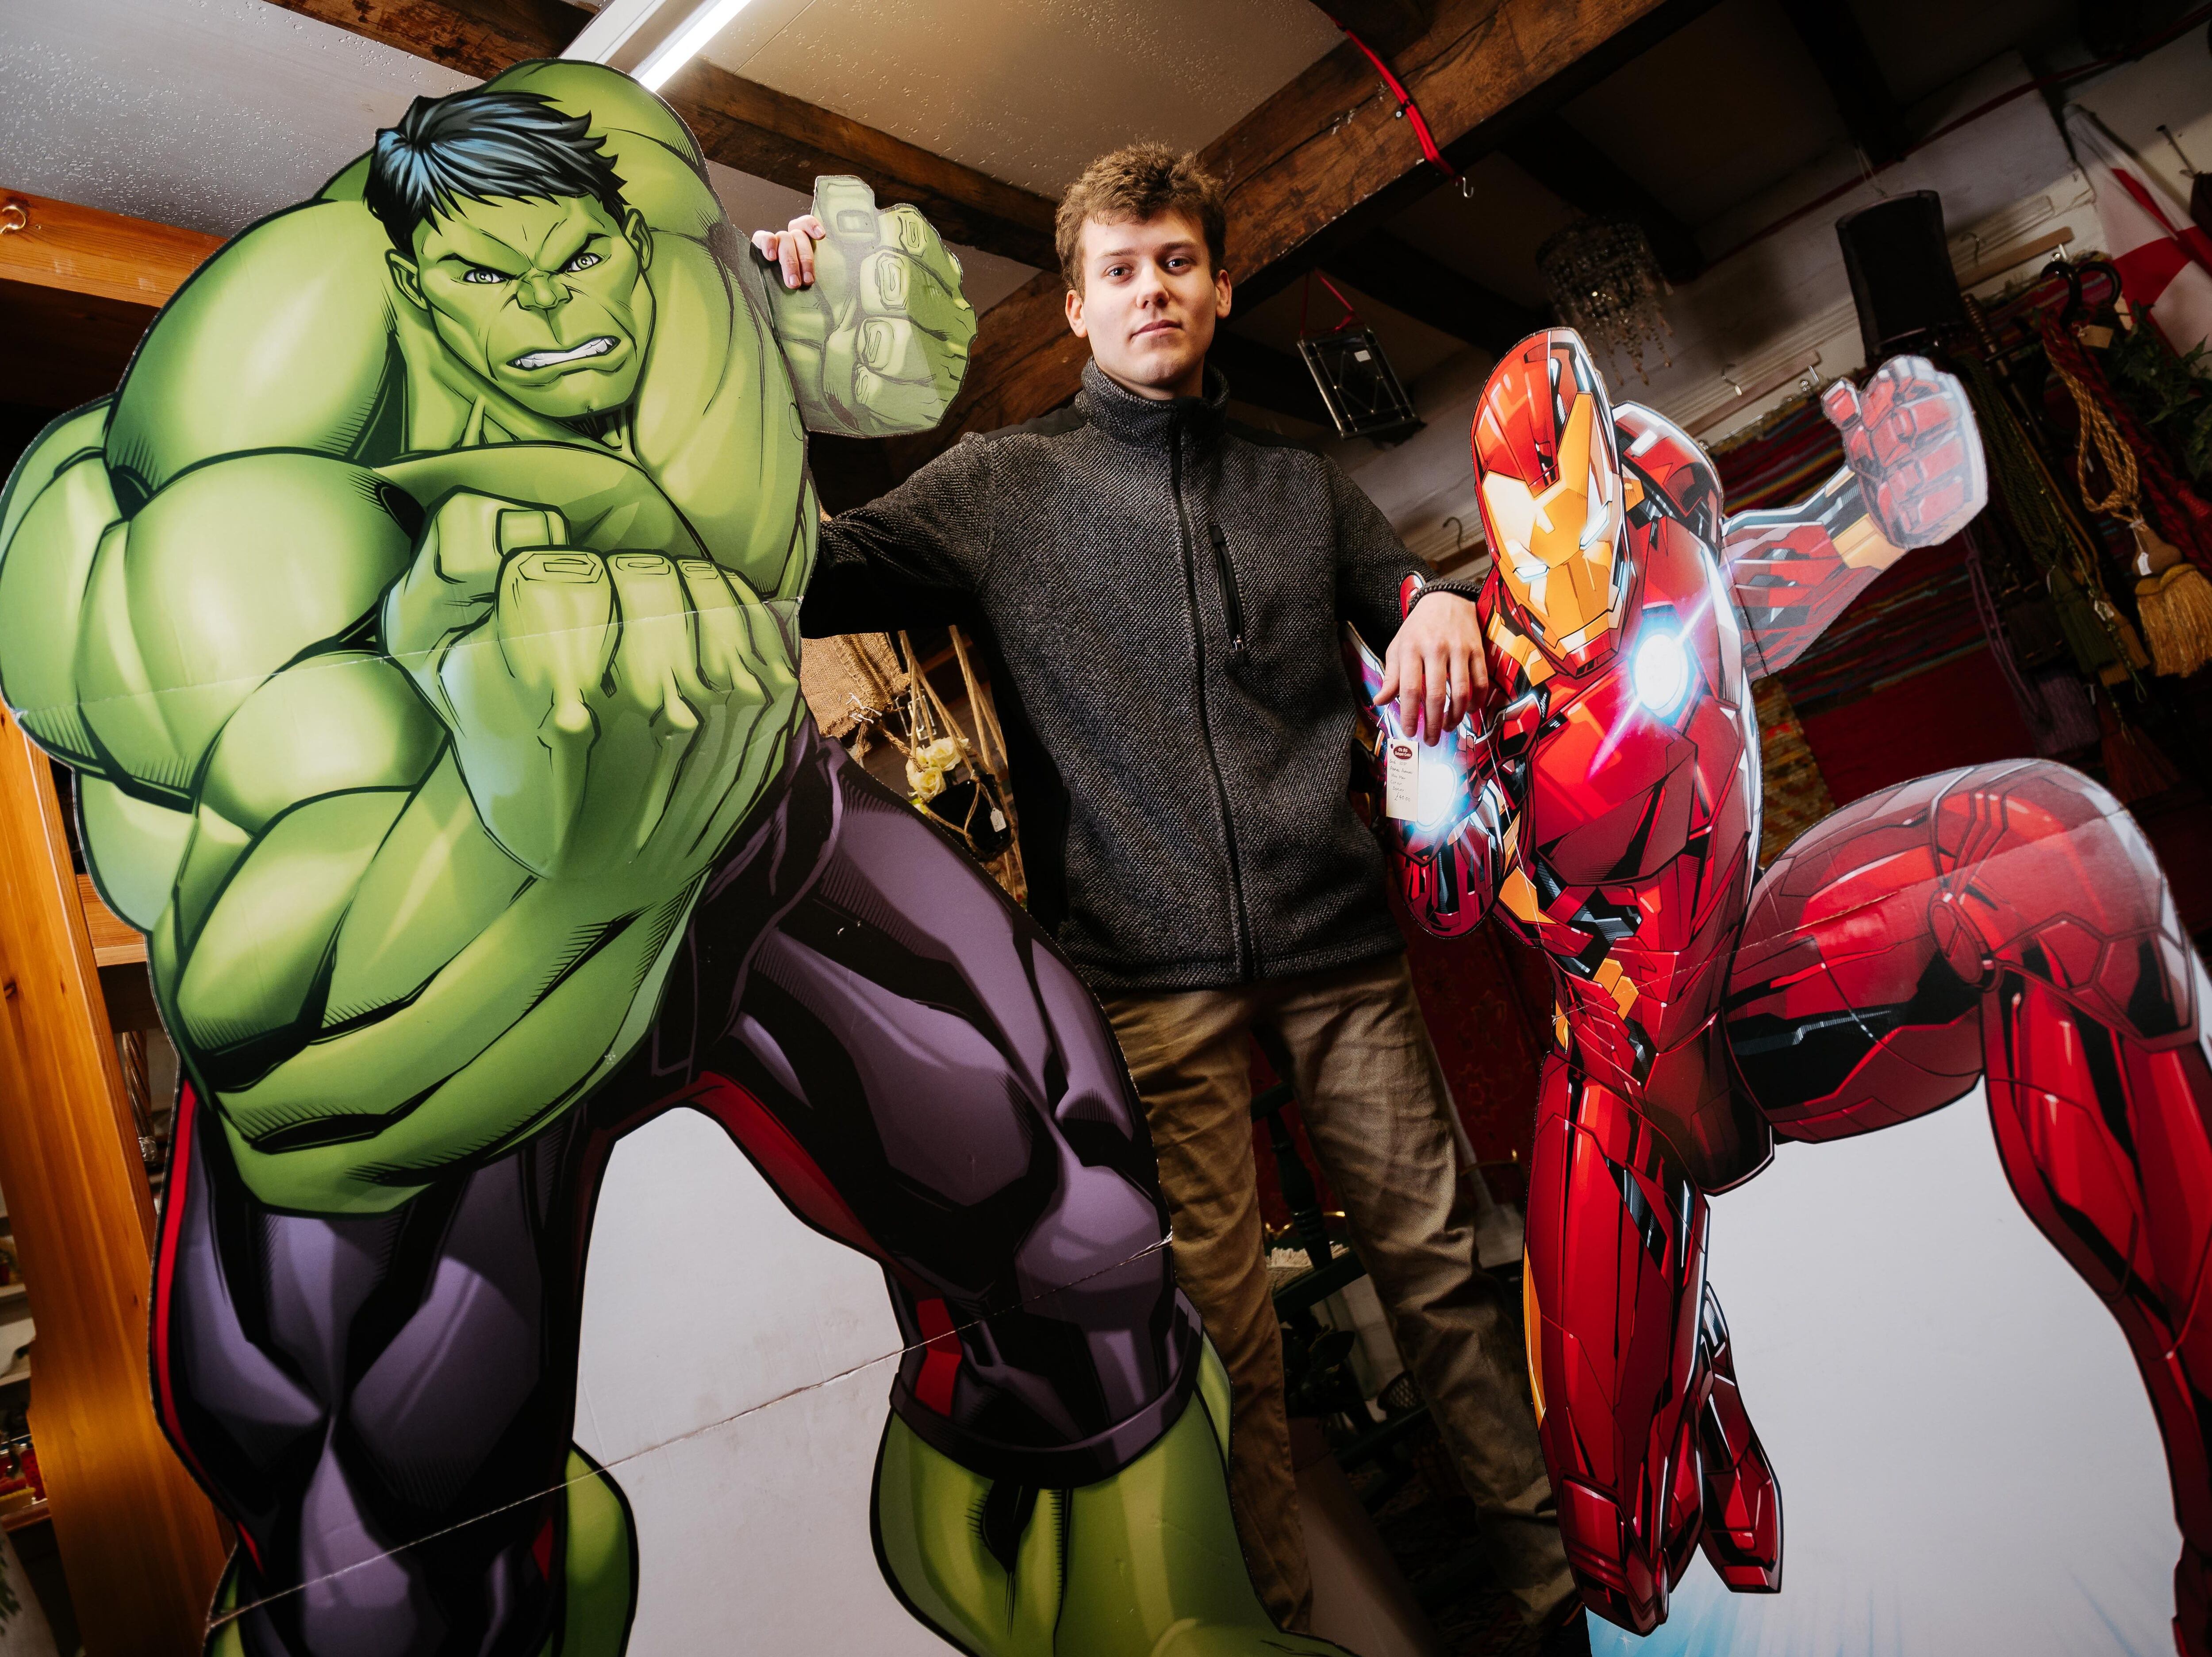 Earth's mightiest Marvel heroes make a surprise appearance at Bridgnorth antiques centre